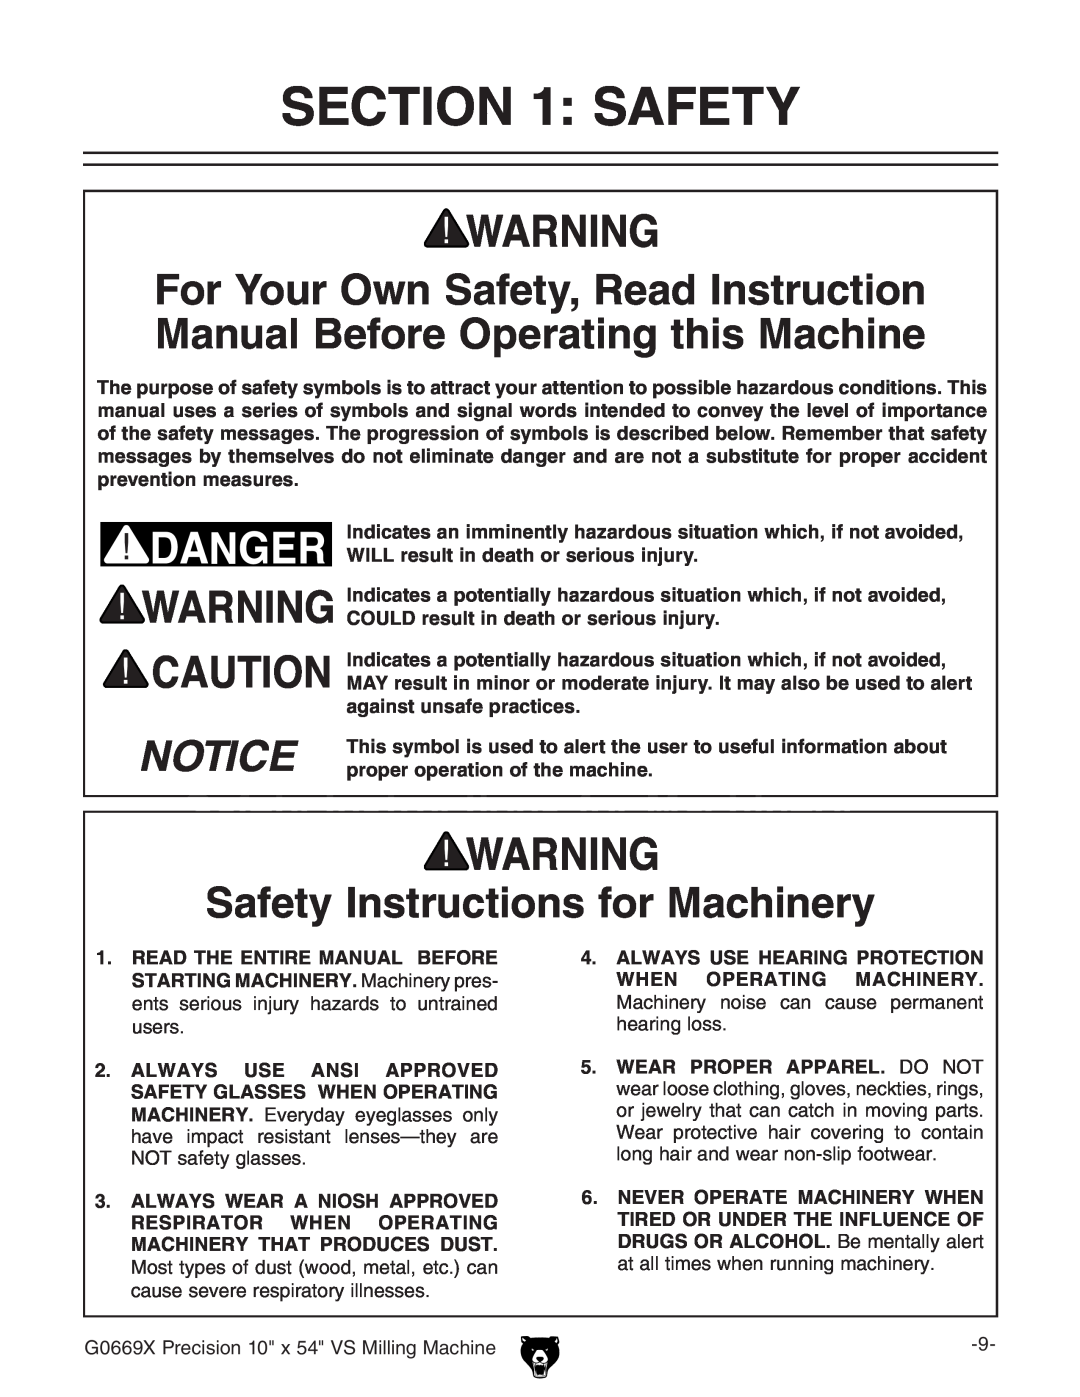 Grizzly g0669X owner manual 3%#4/..3!&%49, Safety Instructions for Machinery, 3AFETYYNSTRUCTIONSSFORR-ACHINERY 